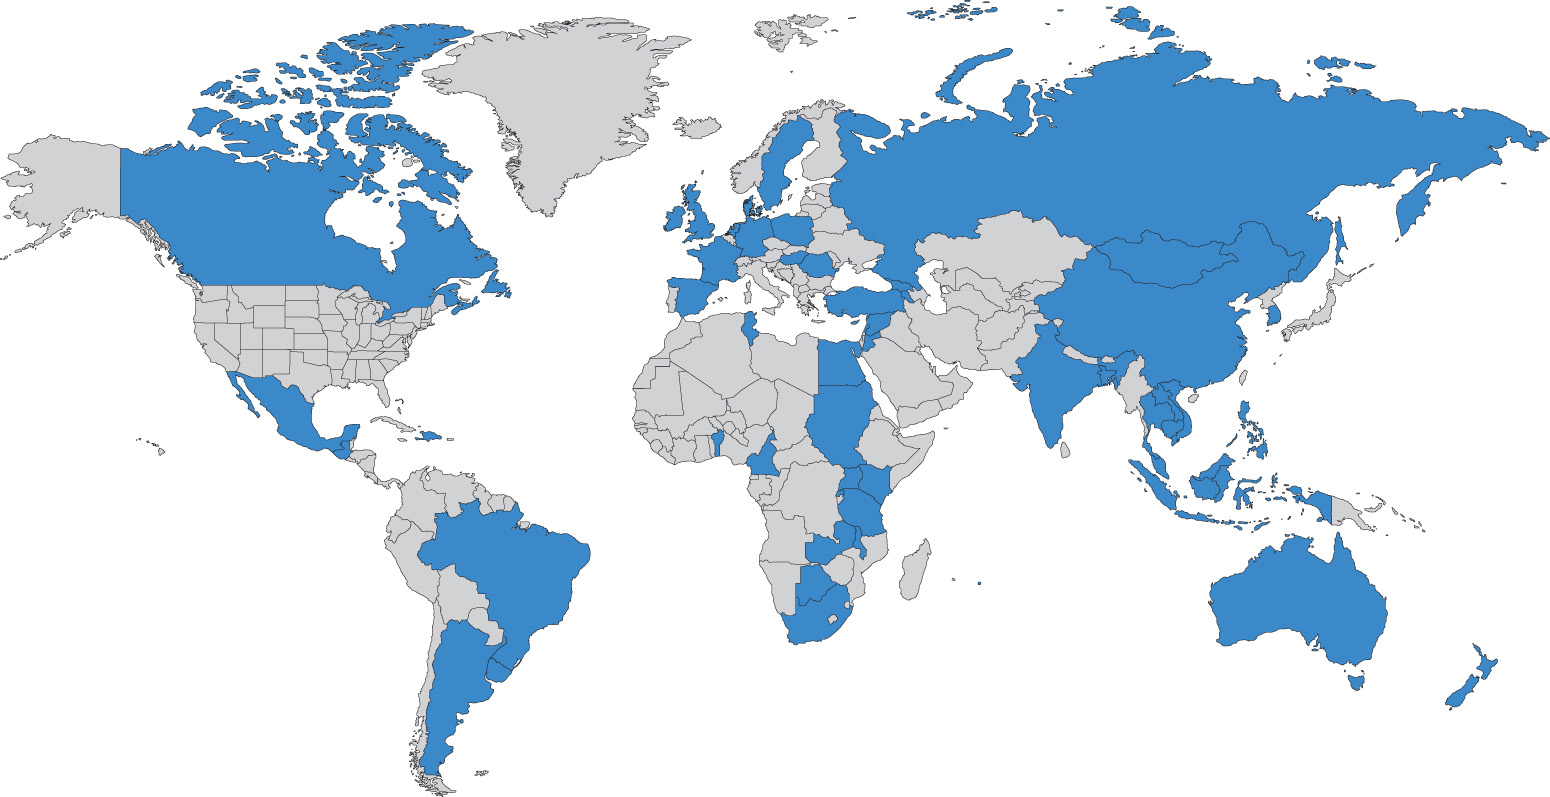 World map with over 40 countries highlighted in blue. NCI has supported tobacco control research grants in more than 40 countries around the world.